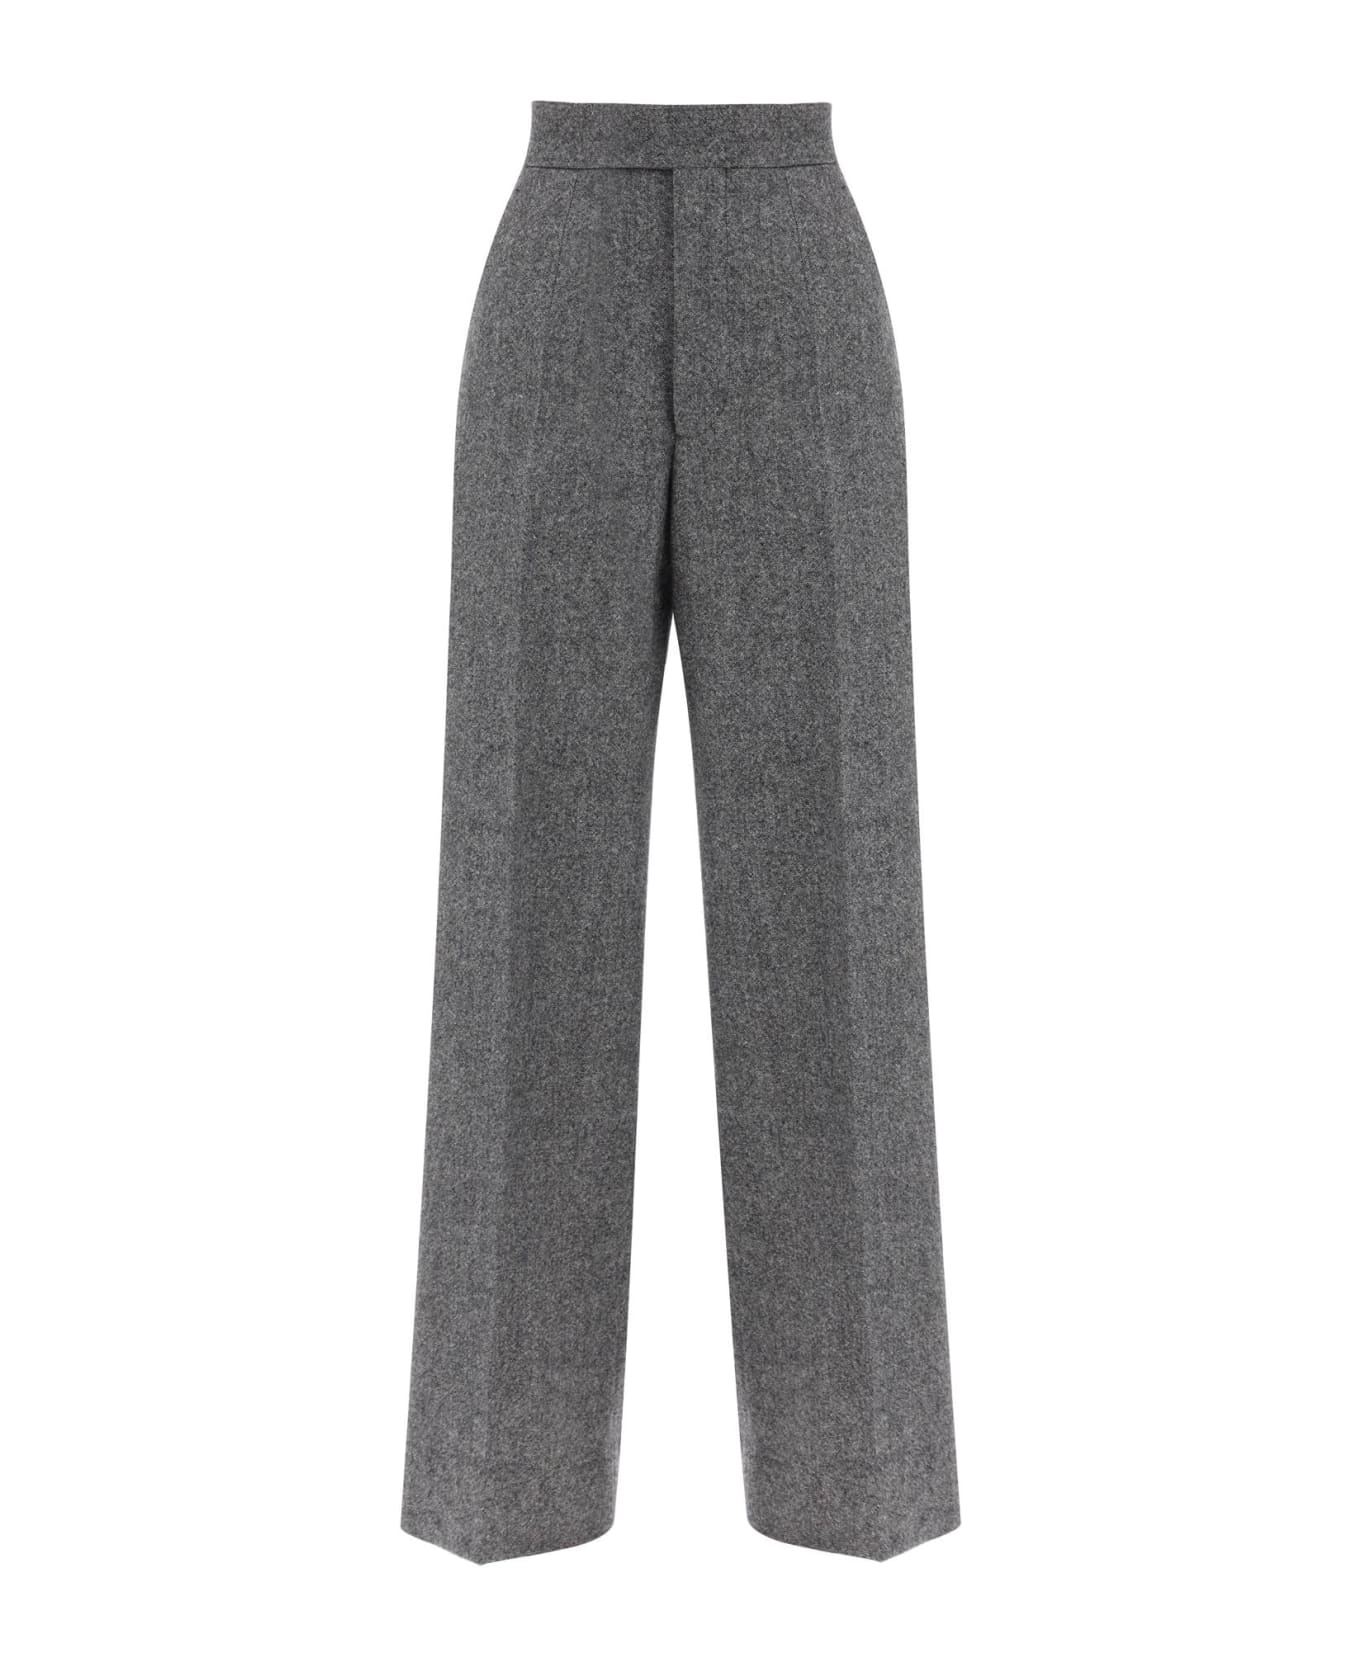 Vivienne Westwood Lauren Trousers In Donegal Tweed - BLACK WHITE (White) ボトムス